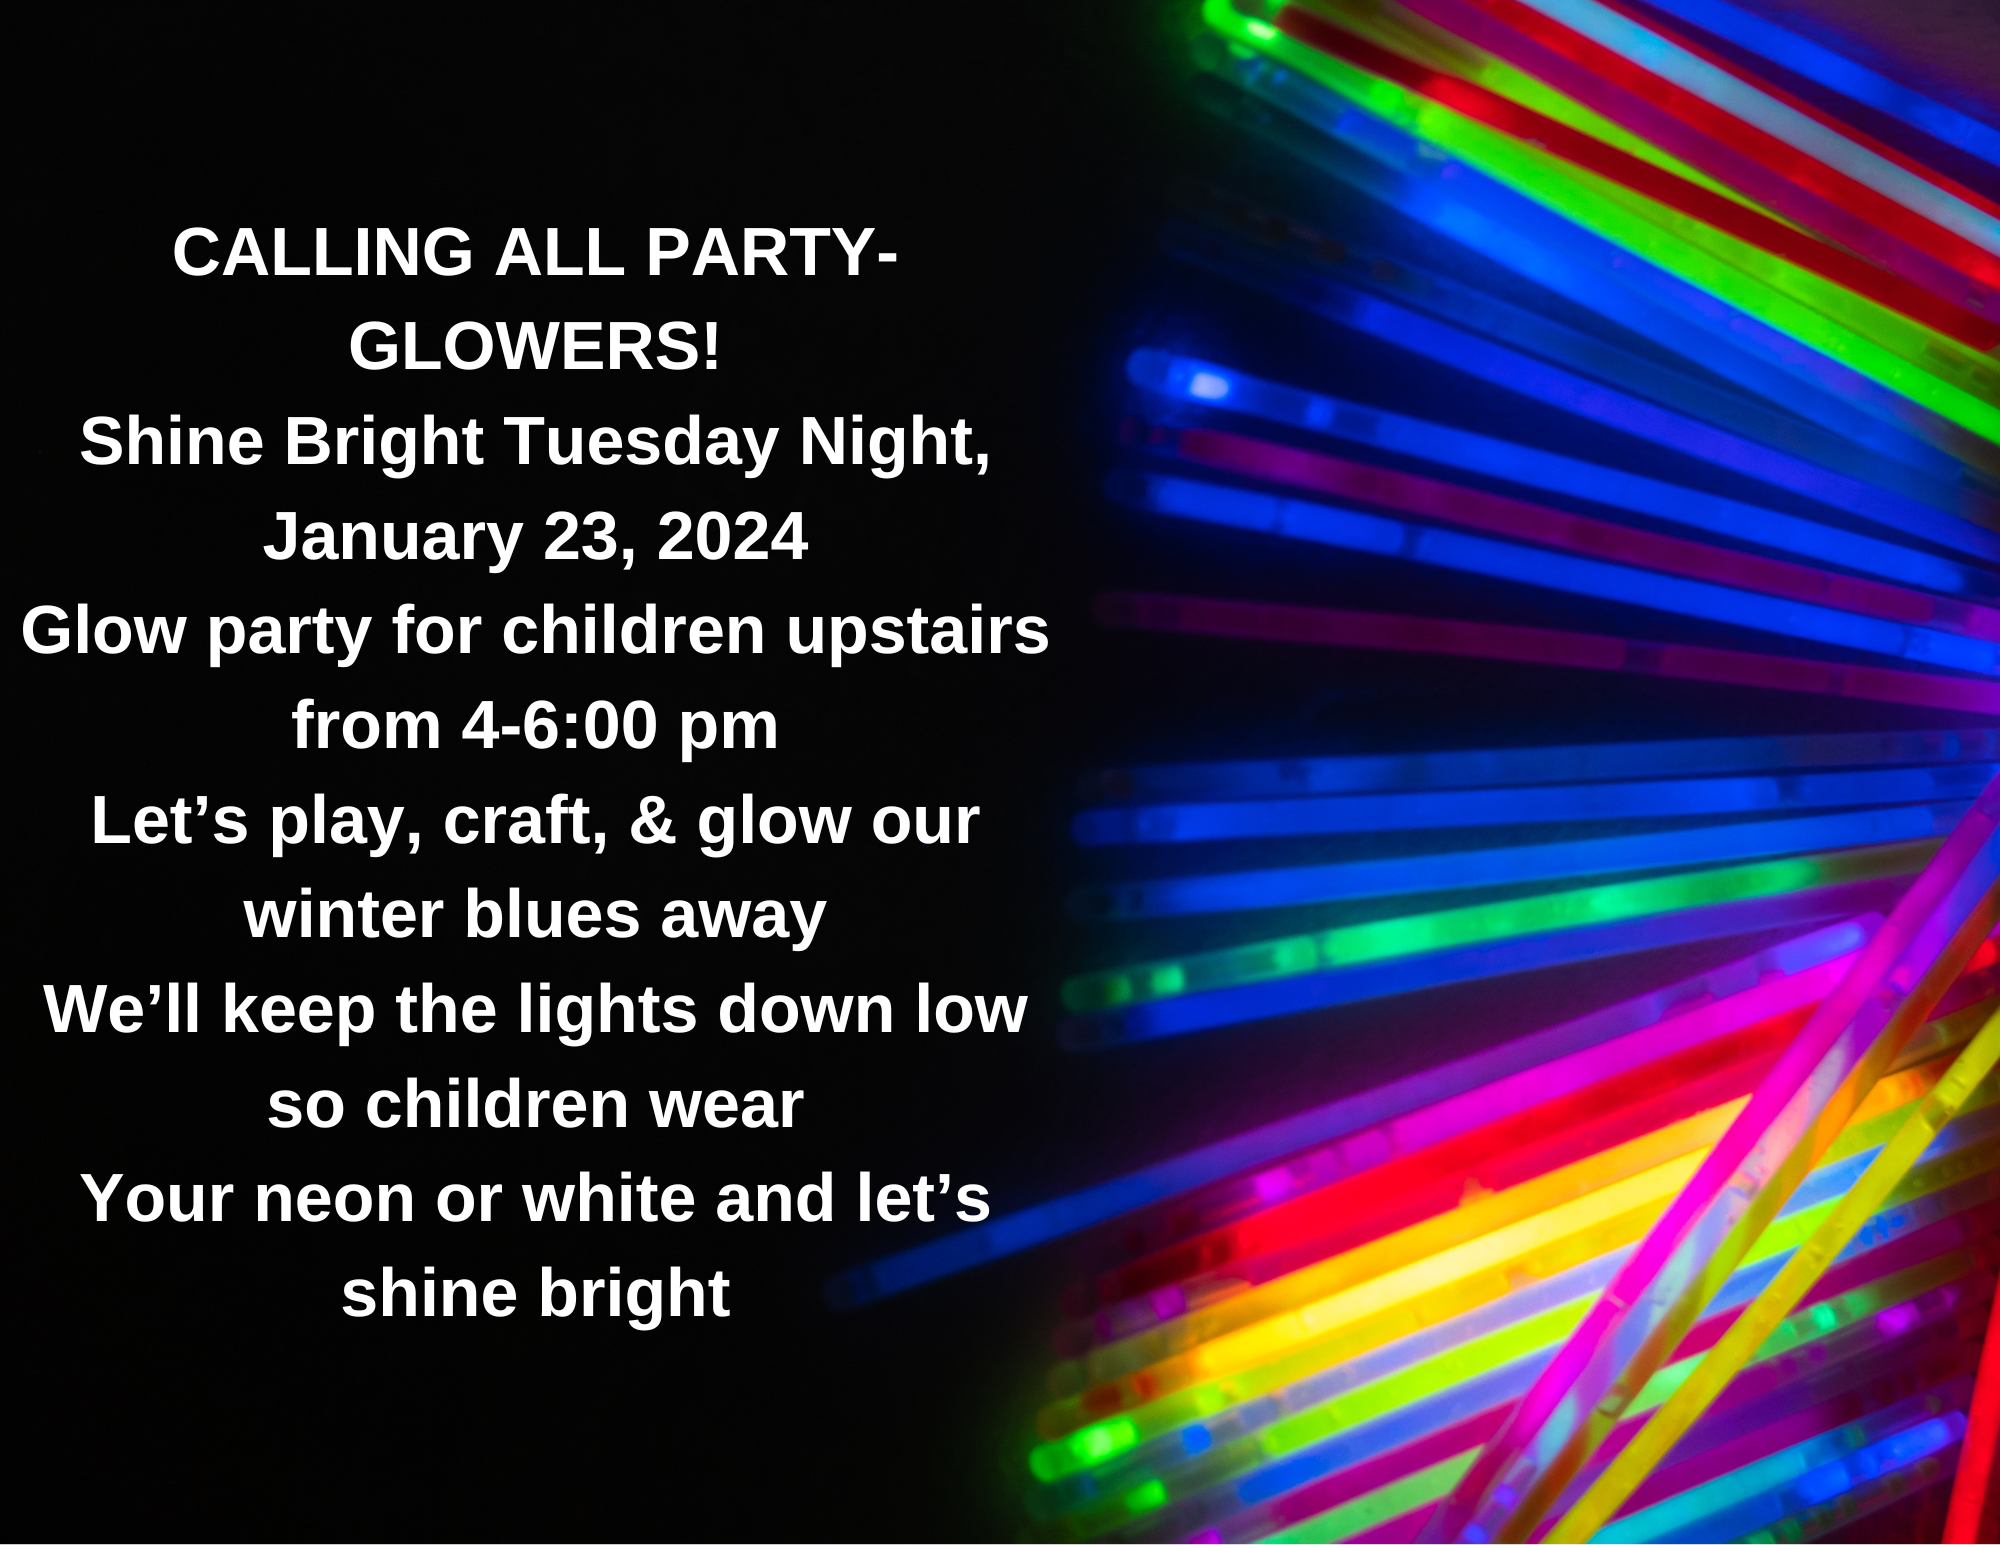 Black background with glow sticks to the right. Text explaining the party to the left.